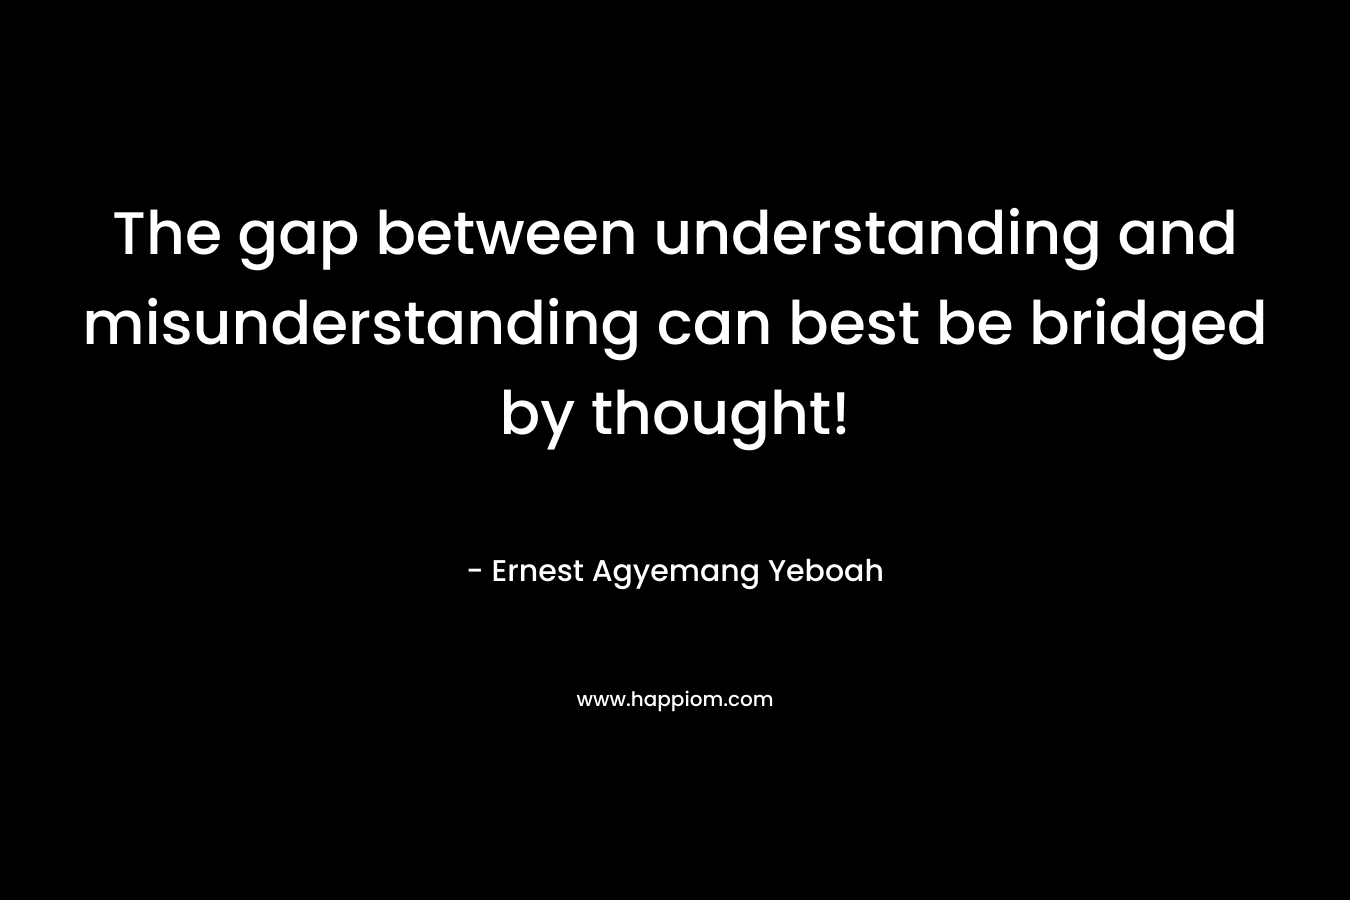 The gap between understanding and misunderstanding can best be bridged by thought!